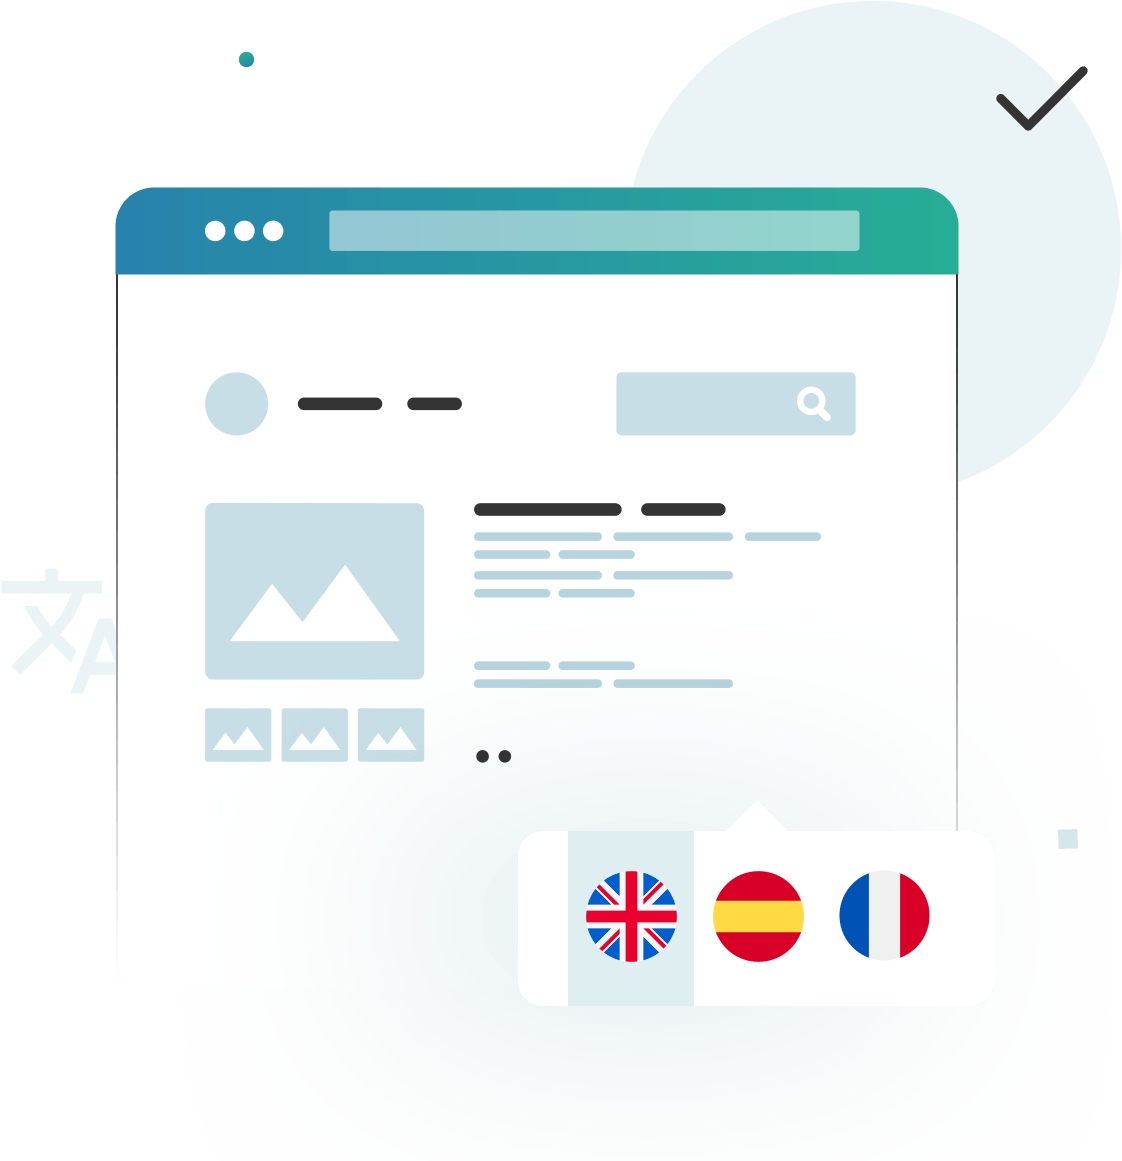 Illustration of a multilingual website interface.